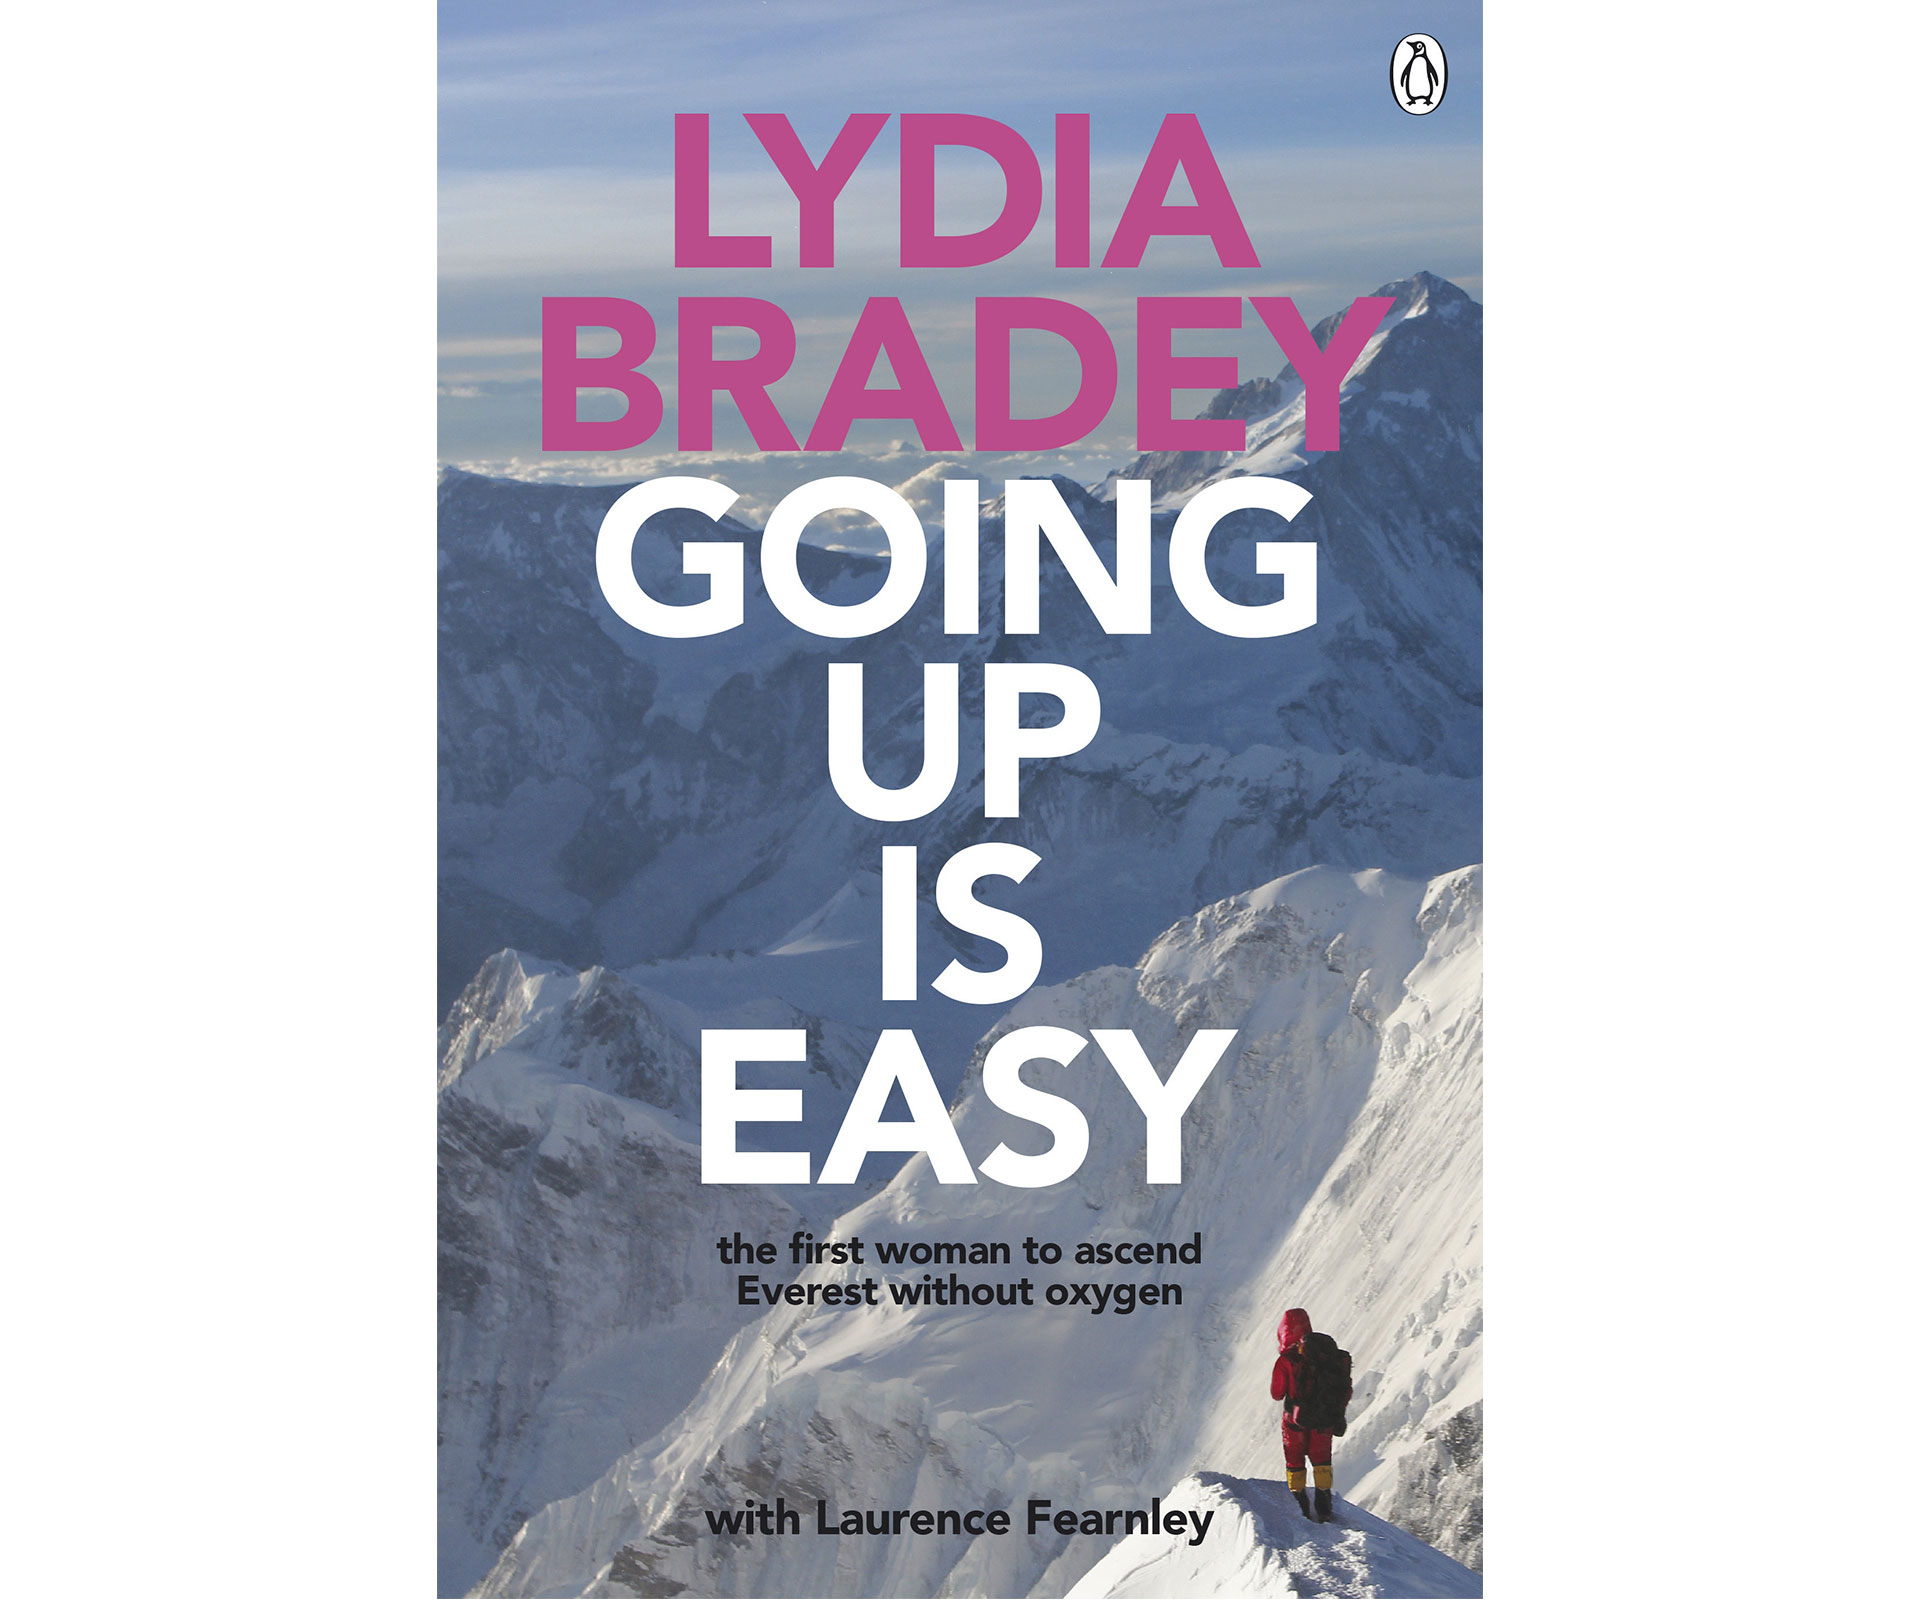 Going Up Is Easy by Lydia Bradey